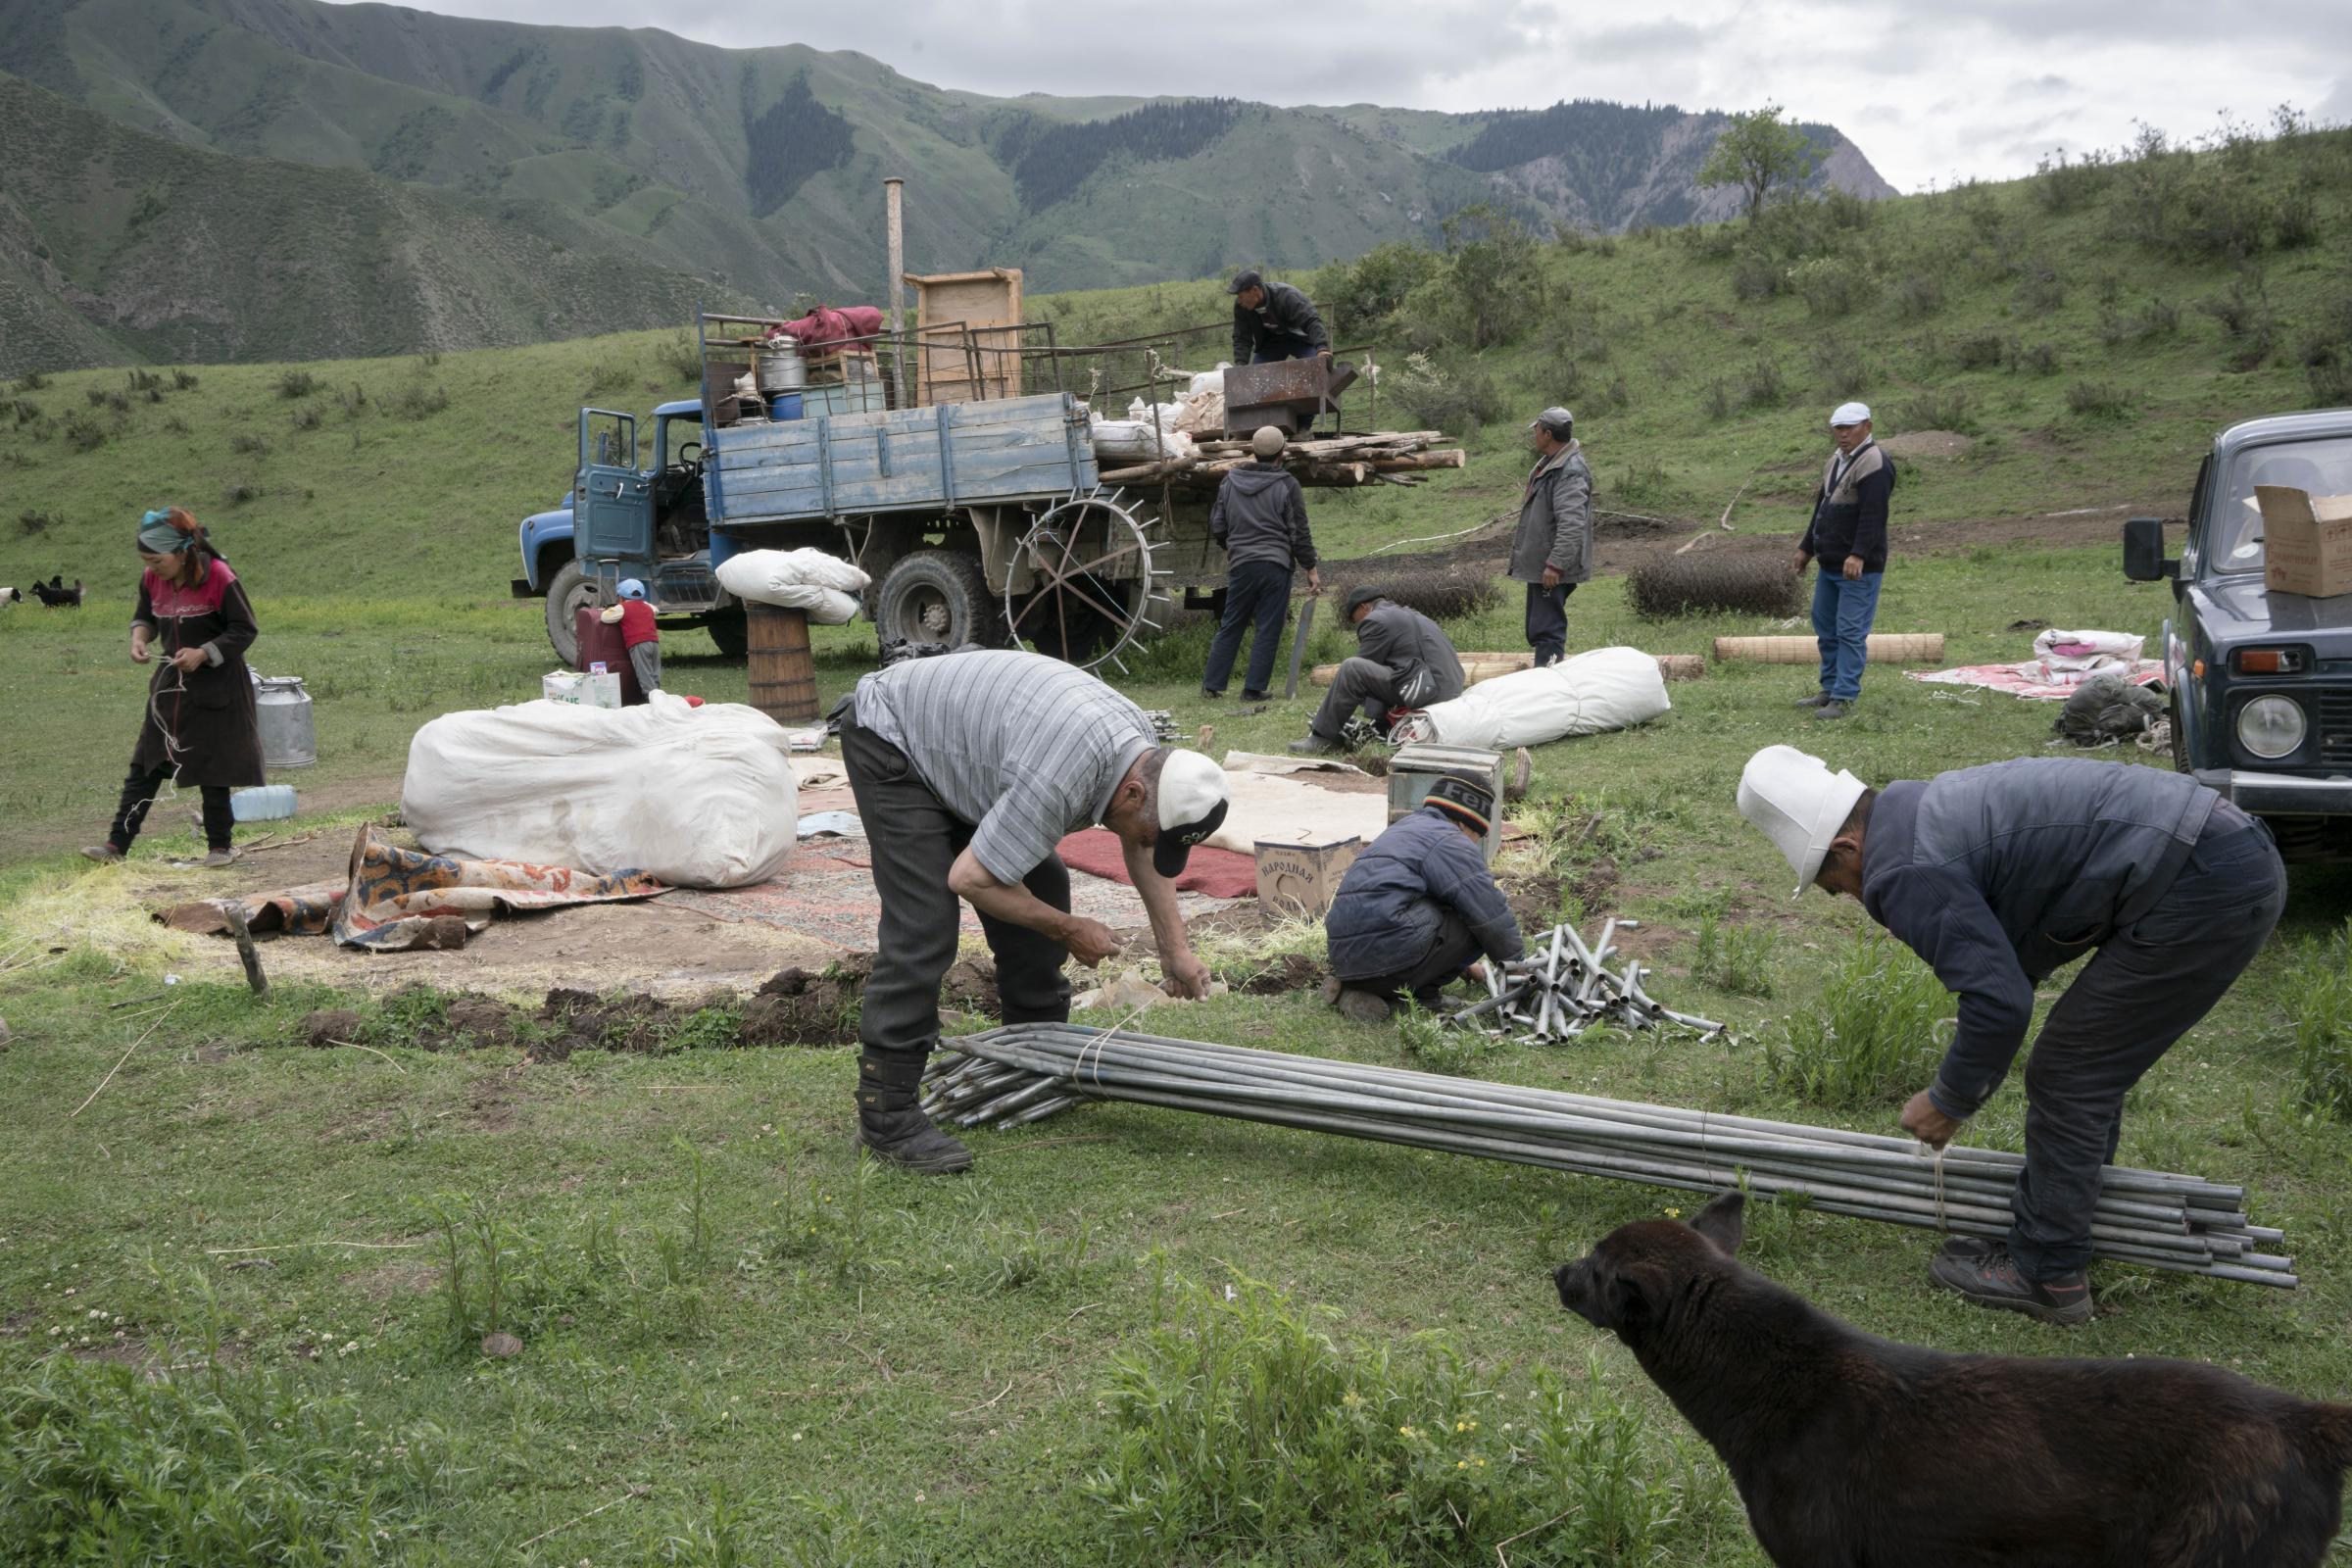 Nomads - The Arsanalievs and a few neighbors from nearby camps help pack their yurts for their move from...